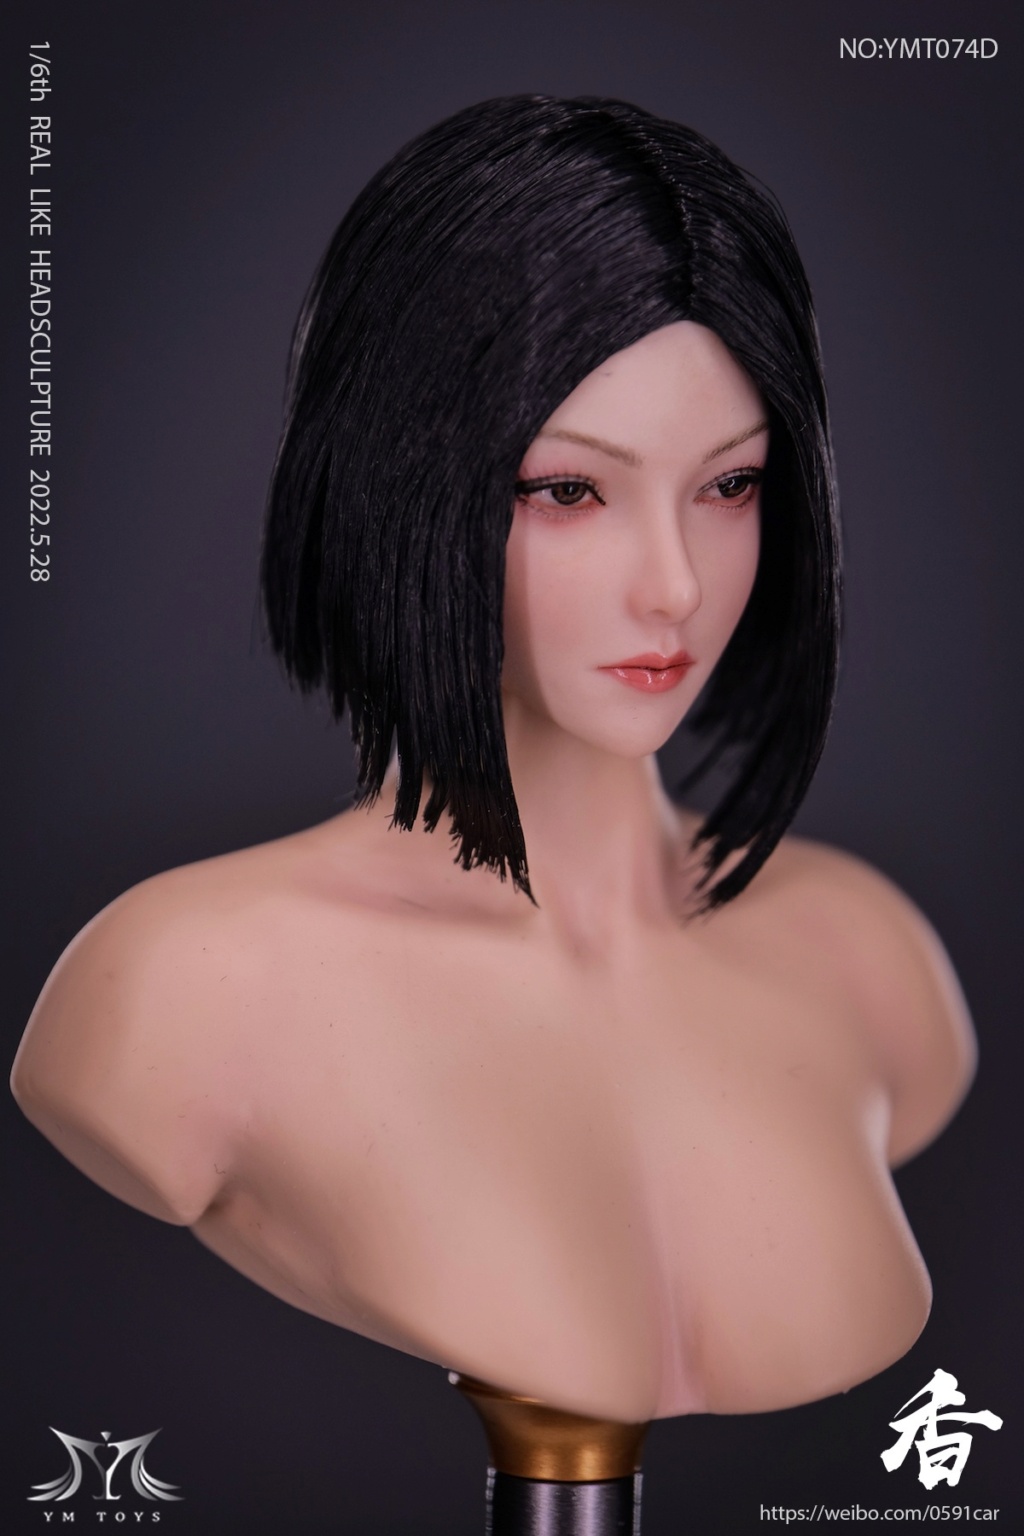 accessory - NEW PRODUCT: YMTOYS: 1/6 YMT074 Cool Female Head Sculpt 14502410